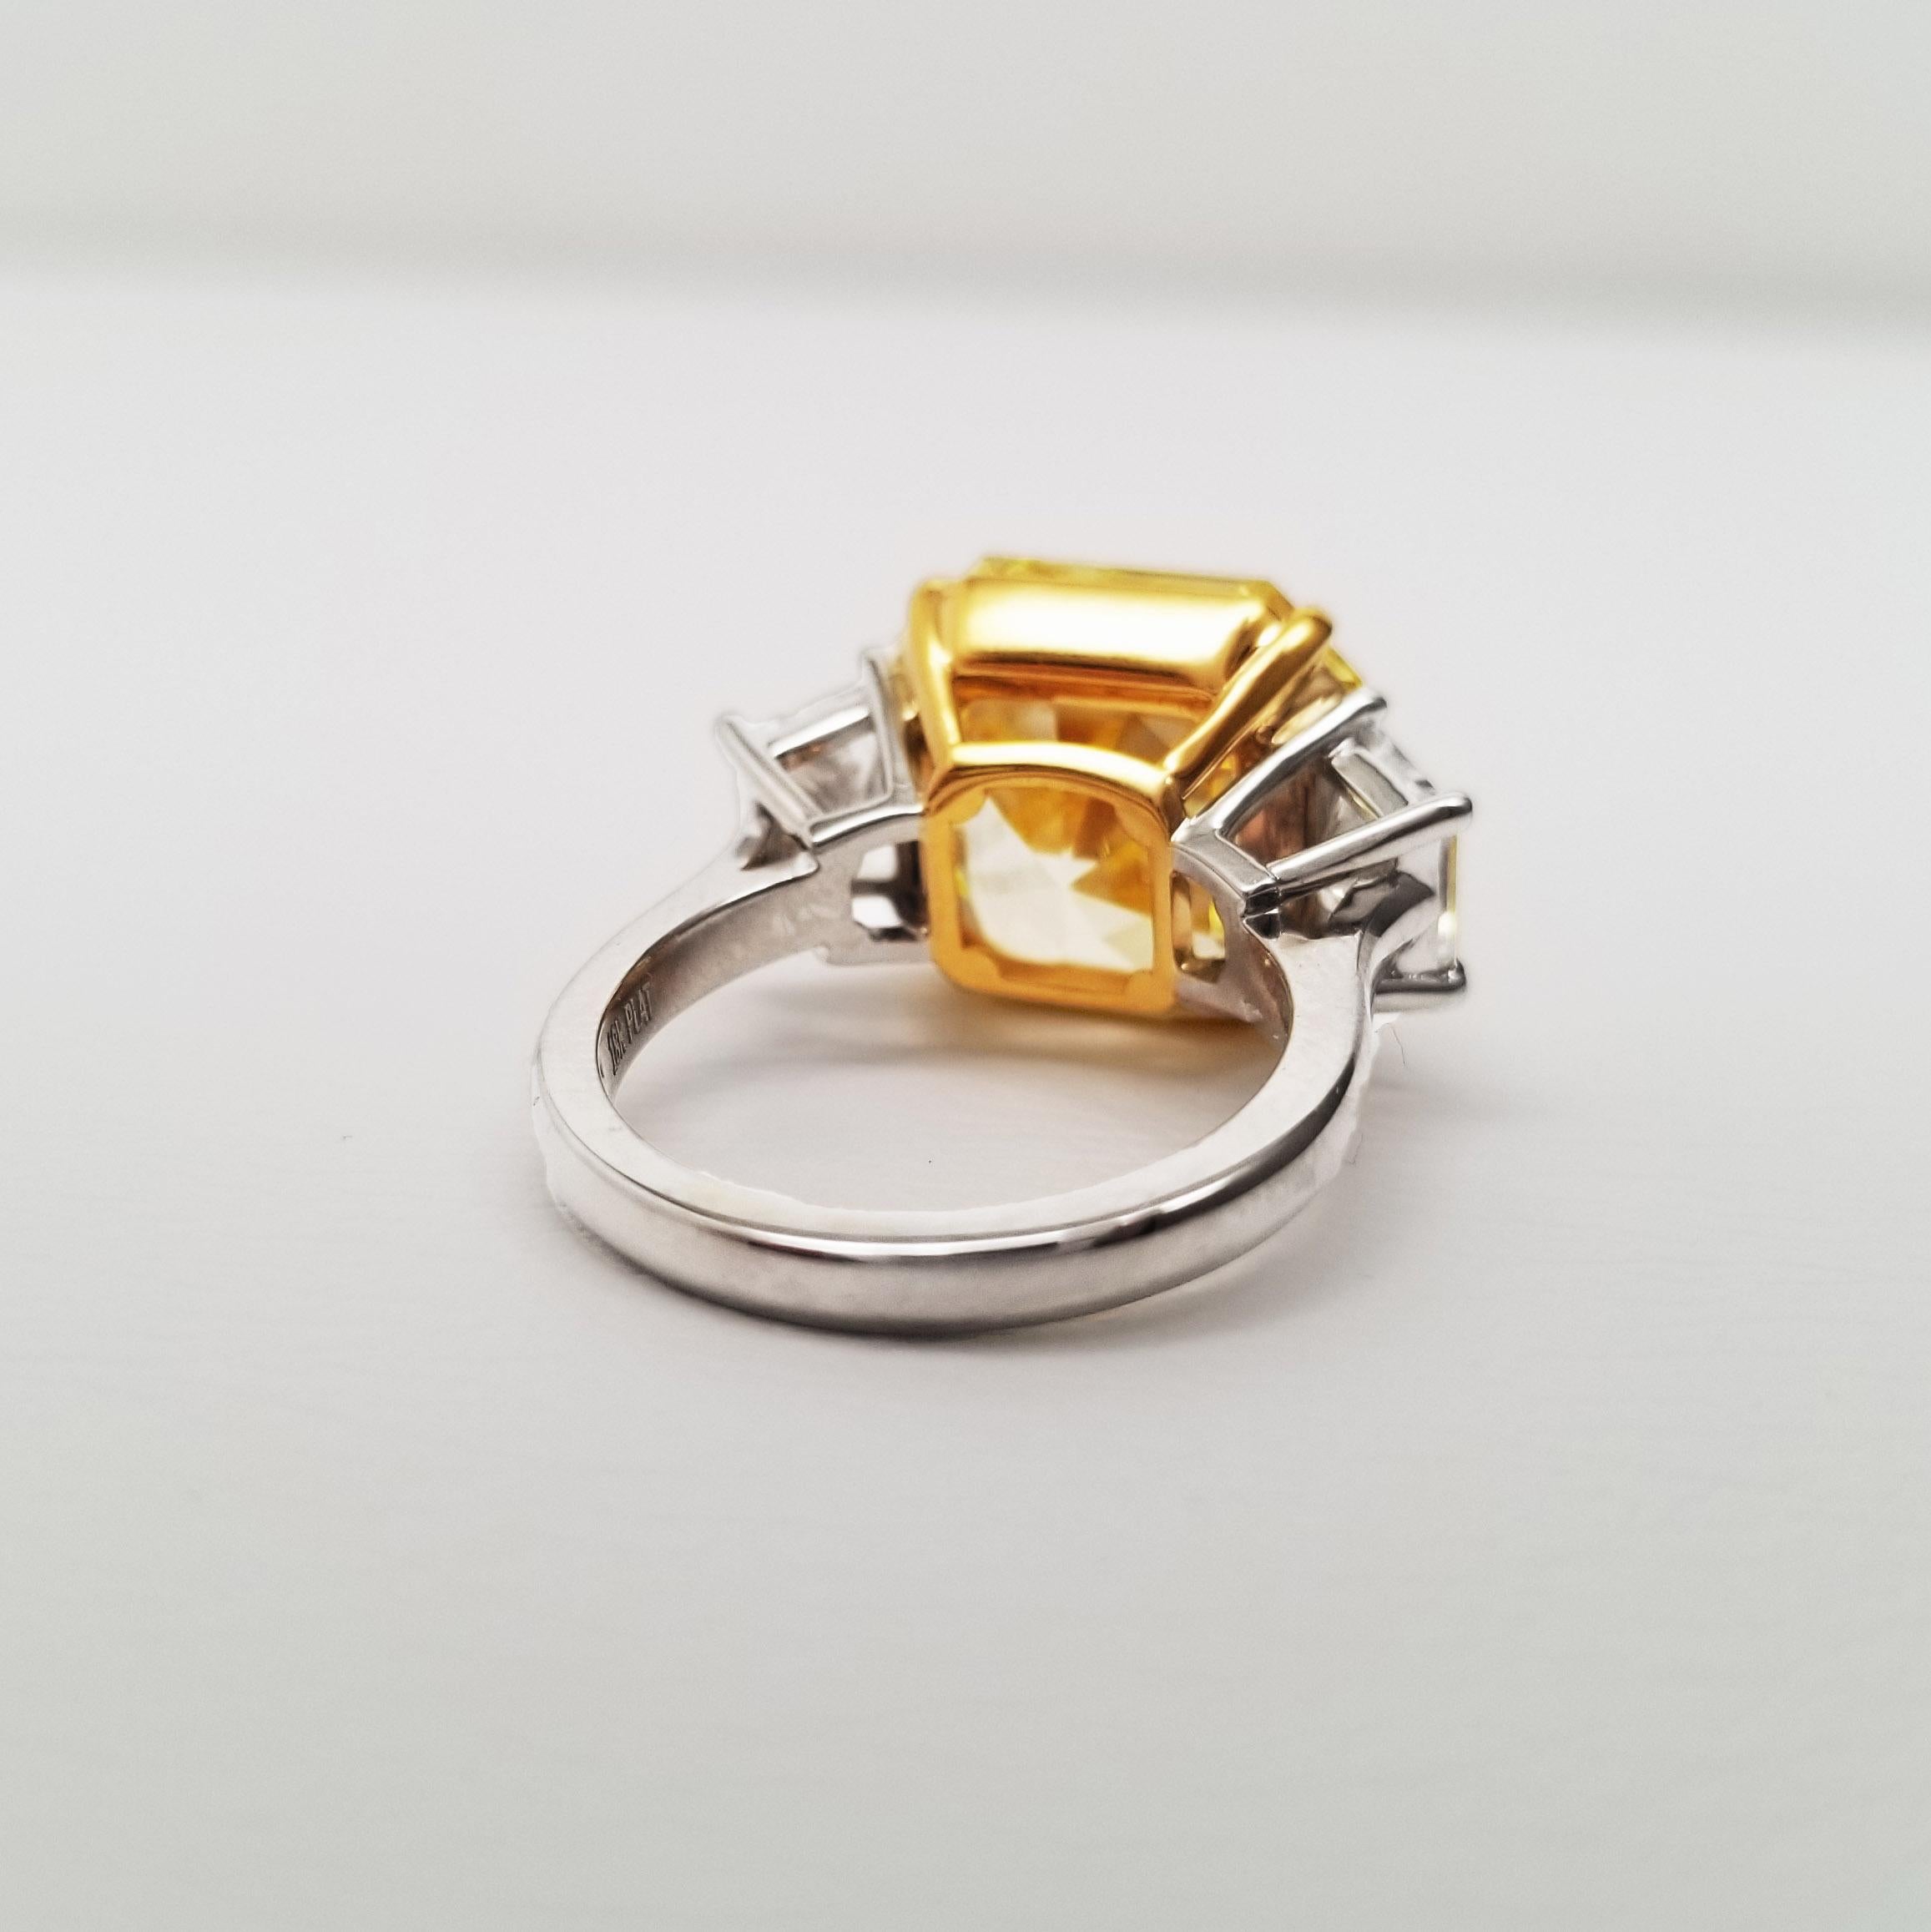 Three-Stone engagement ring from Scarselli featuring a 12.22 carat Fancy Intense Yellow center stone, Asscher-cut and GIA certified. The center stone has VVS1 clarity and is between two white, trapezoid cut side stones – 1.53 collective weight and